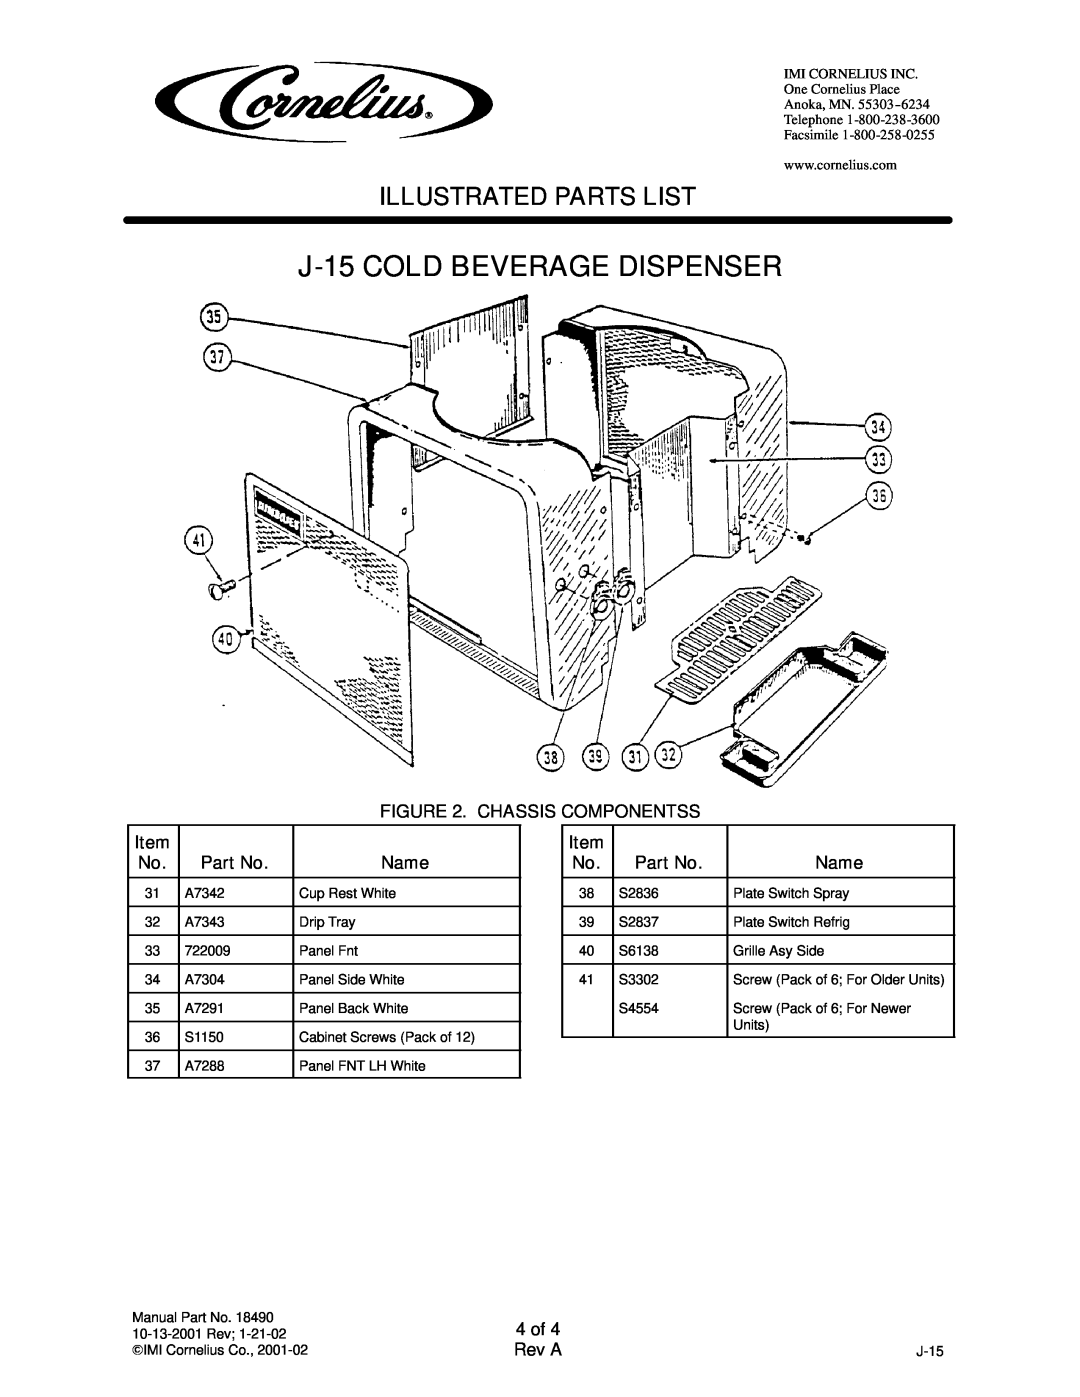 Cornelius A8662, A8663, A8661 Chassis Componentss, 4 of, J-15COLD BEVERAGE DISPENSER, Illustrated Parts List, Name, Rev A 